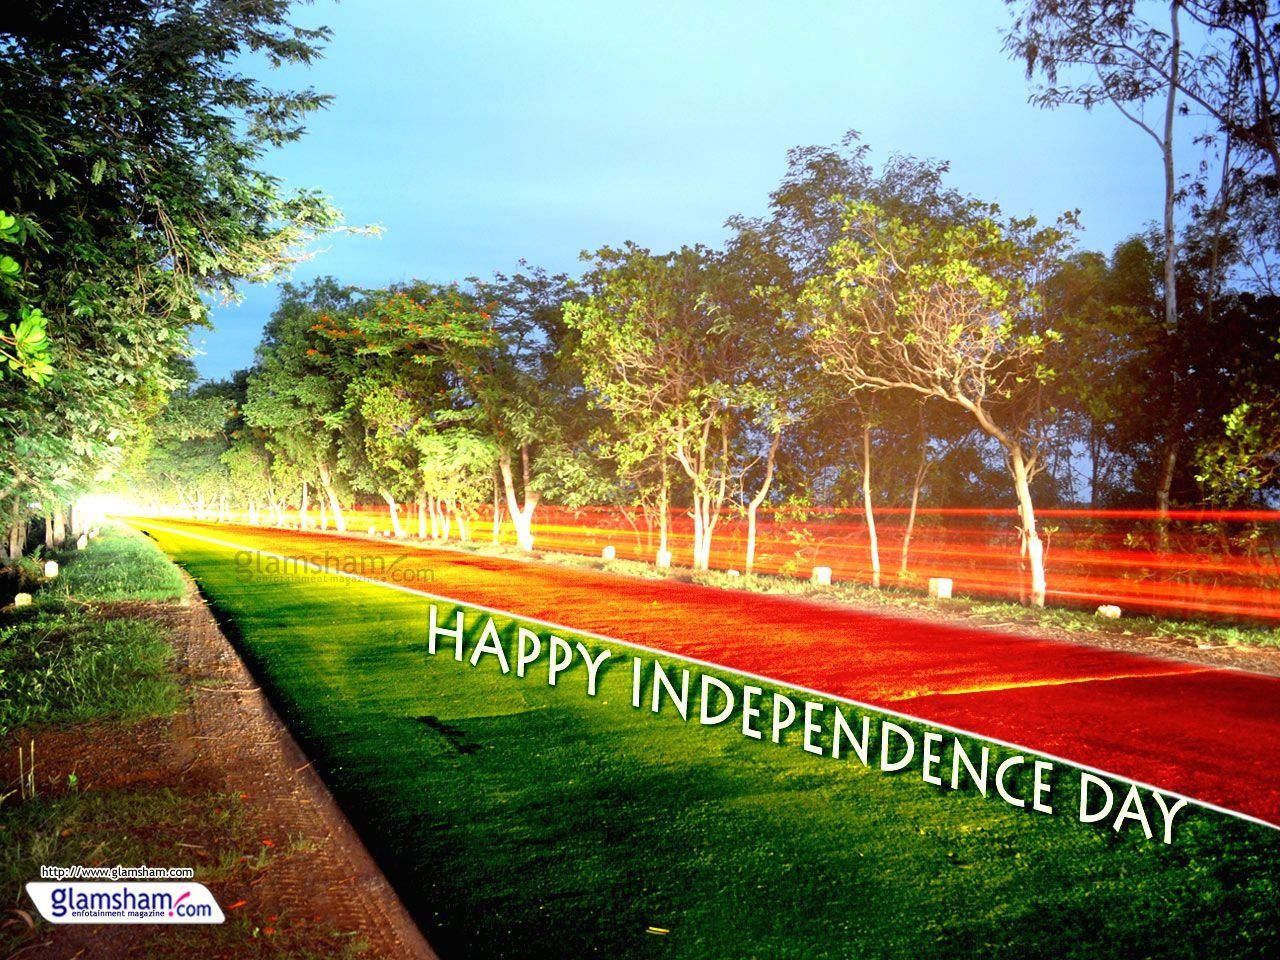 15 August Independence Day Wallpaper View Hd Image Of 15